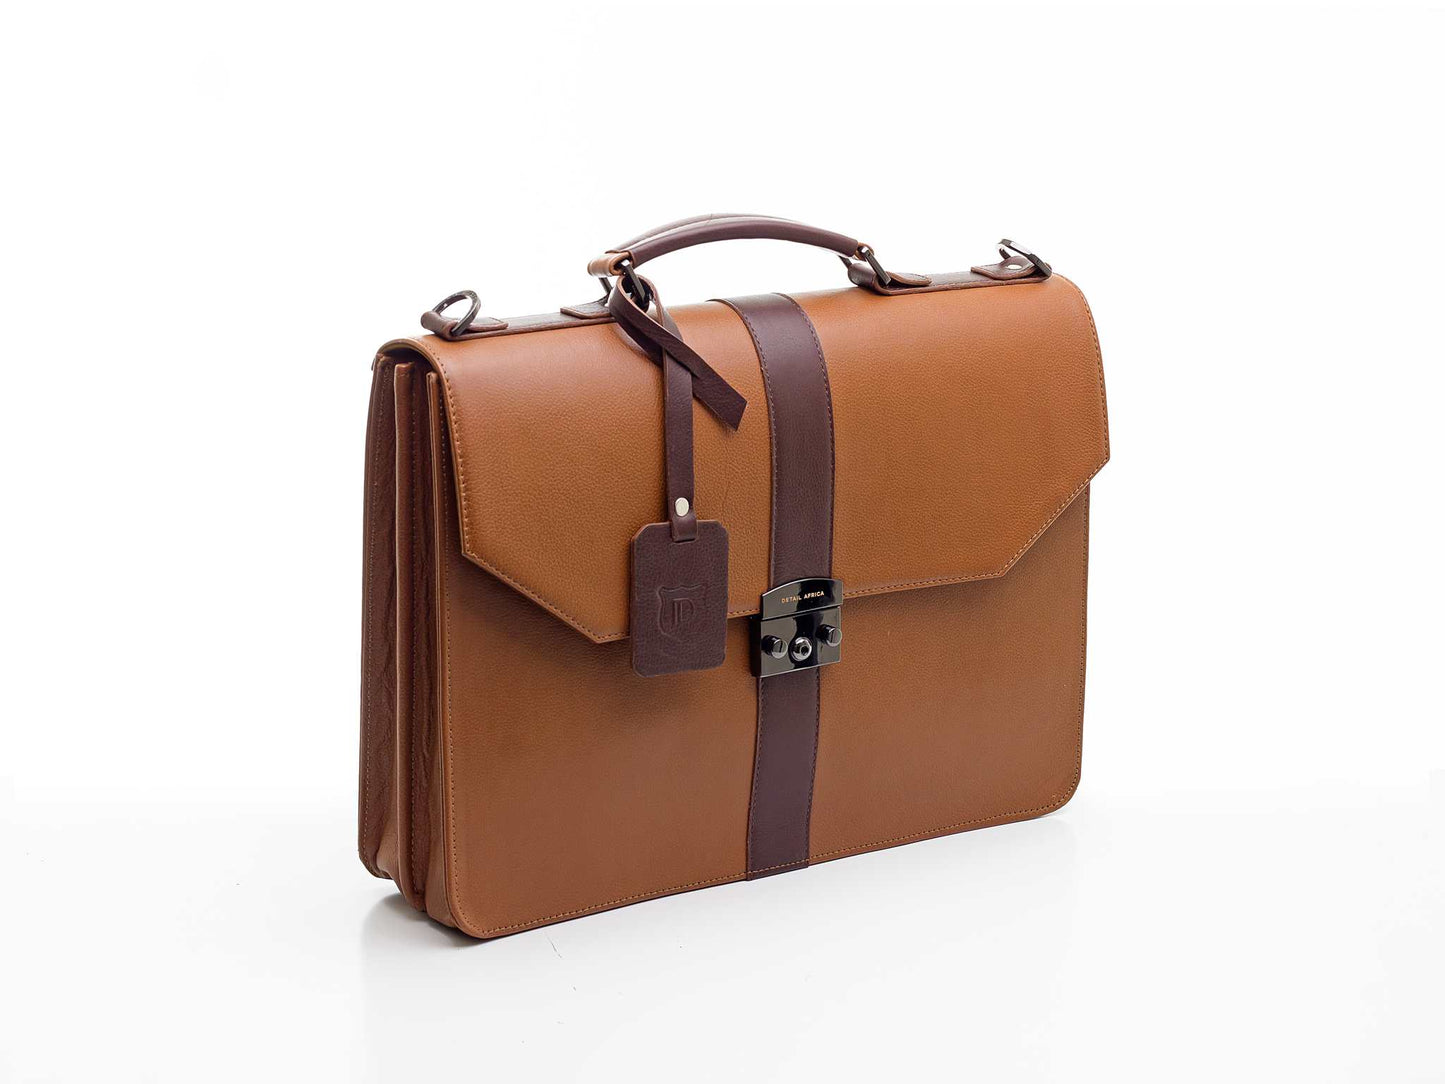 The Tan Leather Briefcase